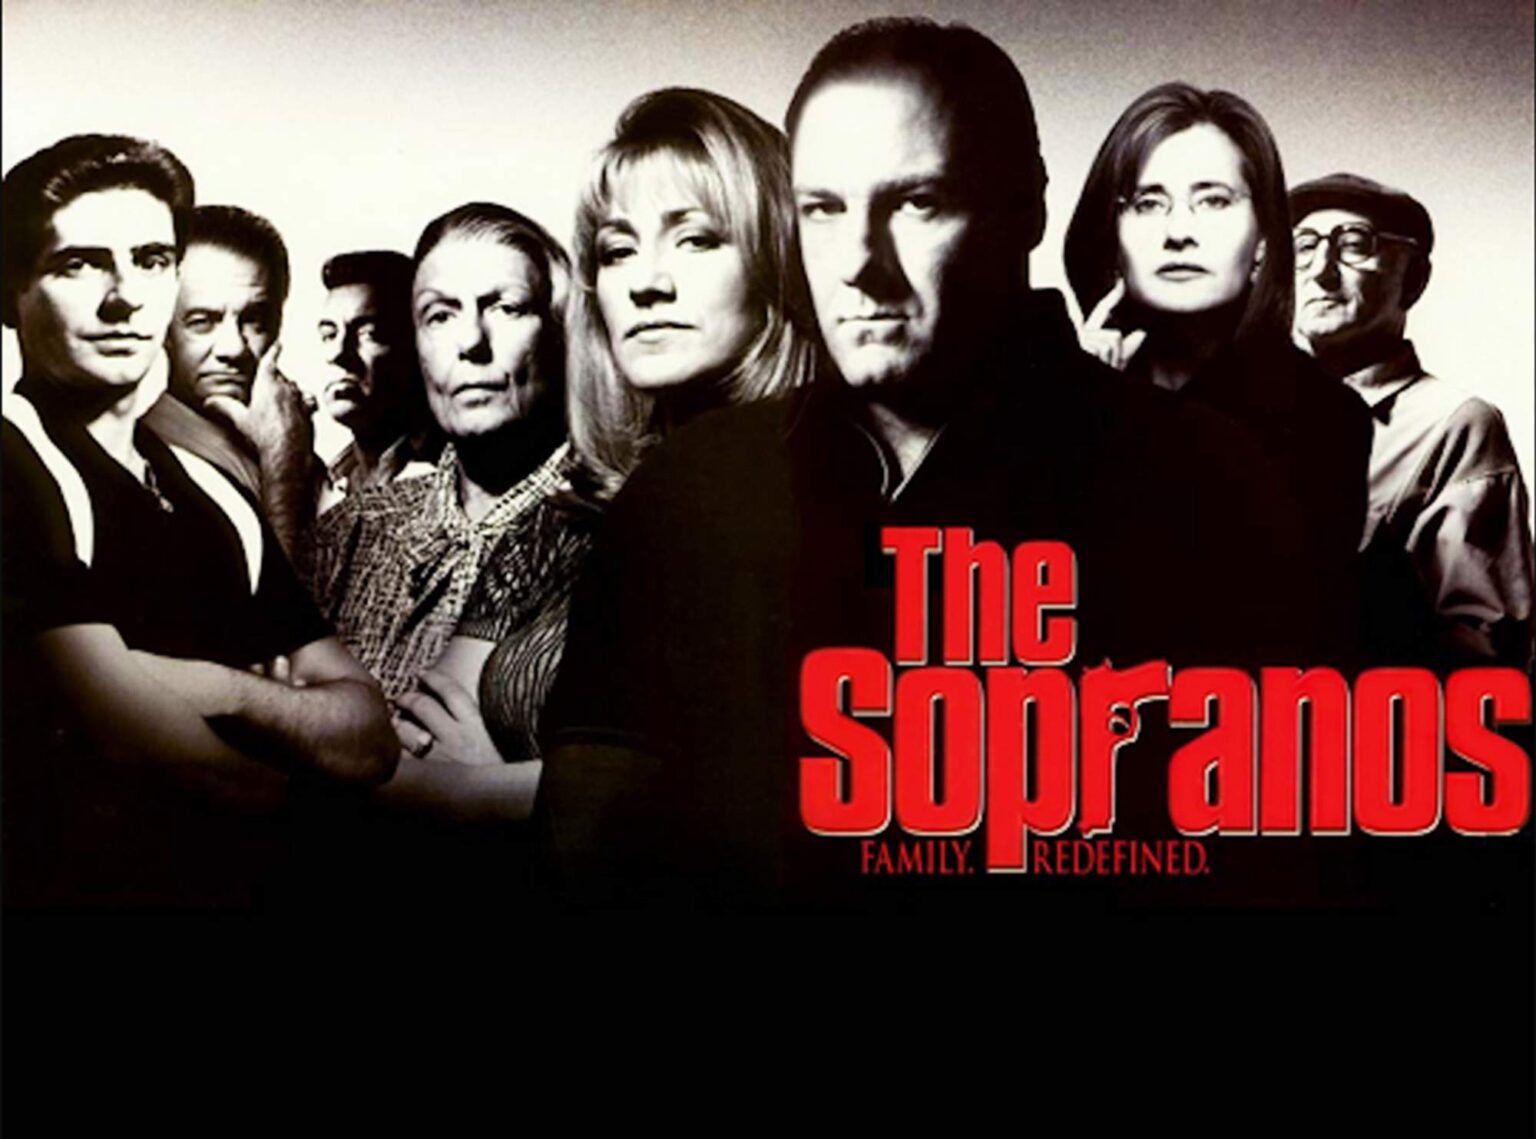 We deep dive into the actions of Tony on 'The Sopranos' in order to decide if he was a good guy or a bad guy. Get ready, there's a lot to unpack.